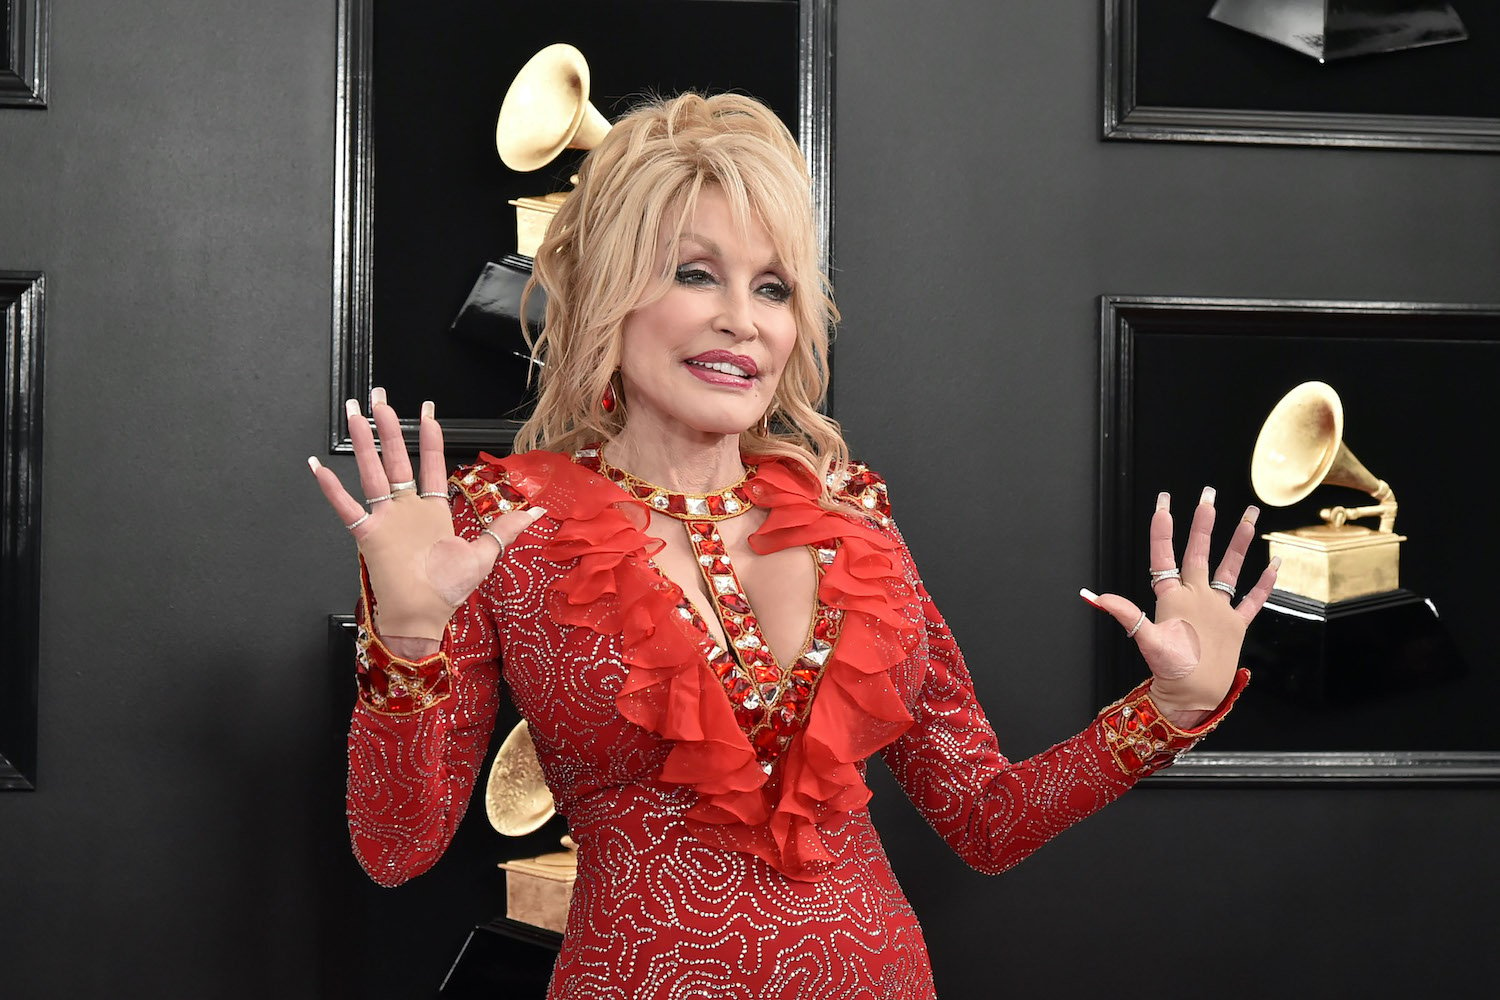 Dolly Parton wears a red low cut dress as she poses at the 61st Annual Grammy Awards at Staples Center on February 10, 2019